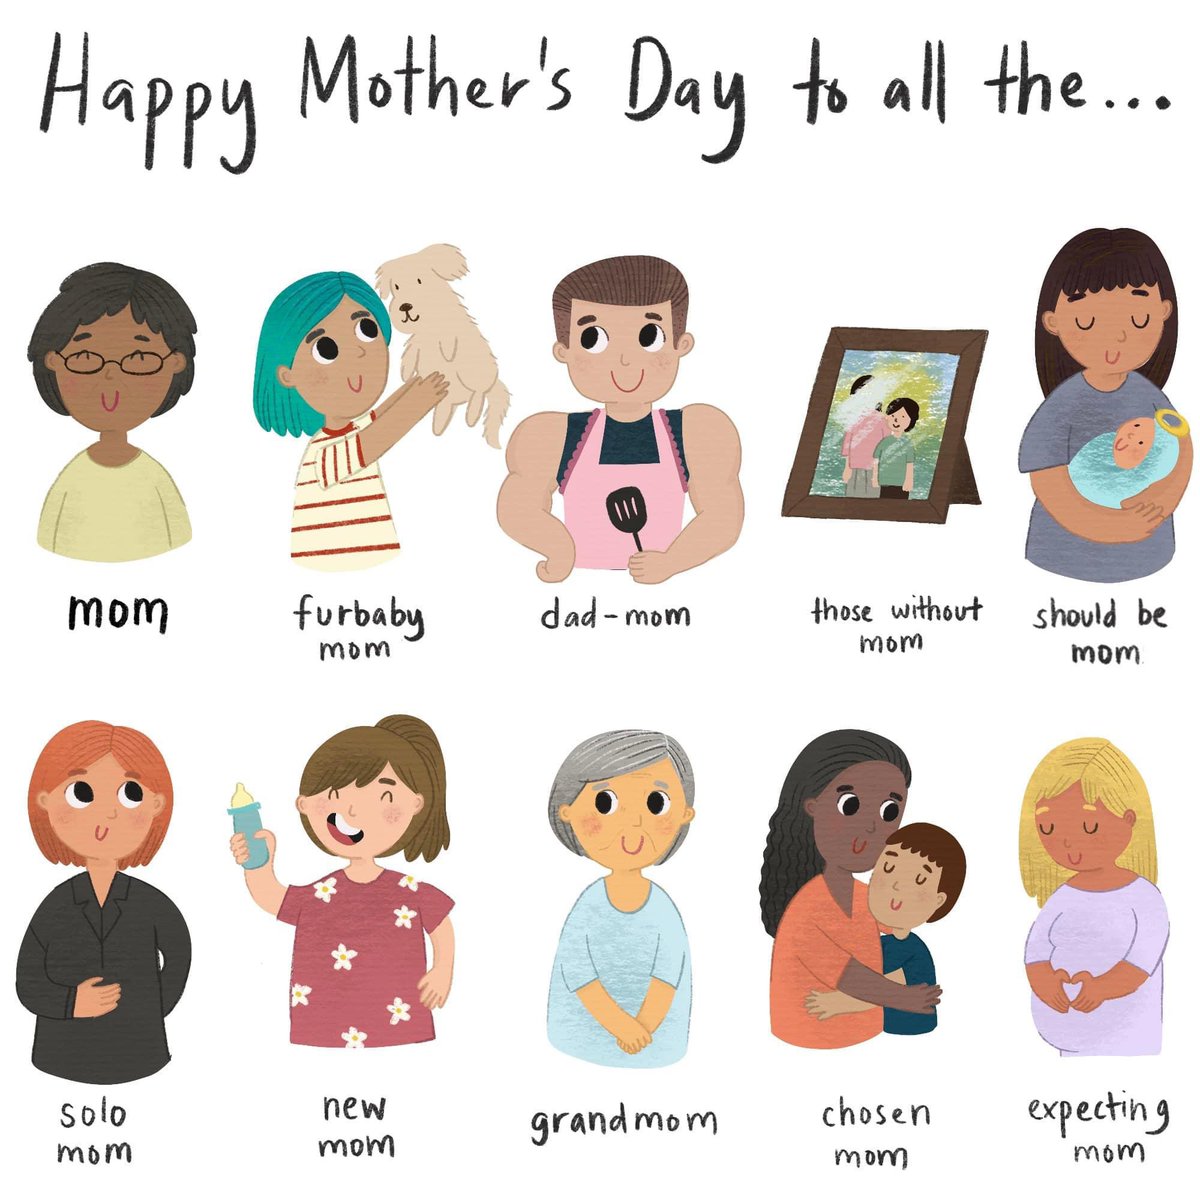 Happy Mother’s Day to all kind of moms out there ❤️ ❤️